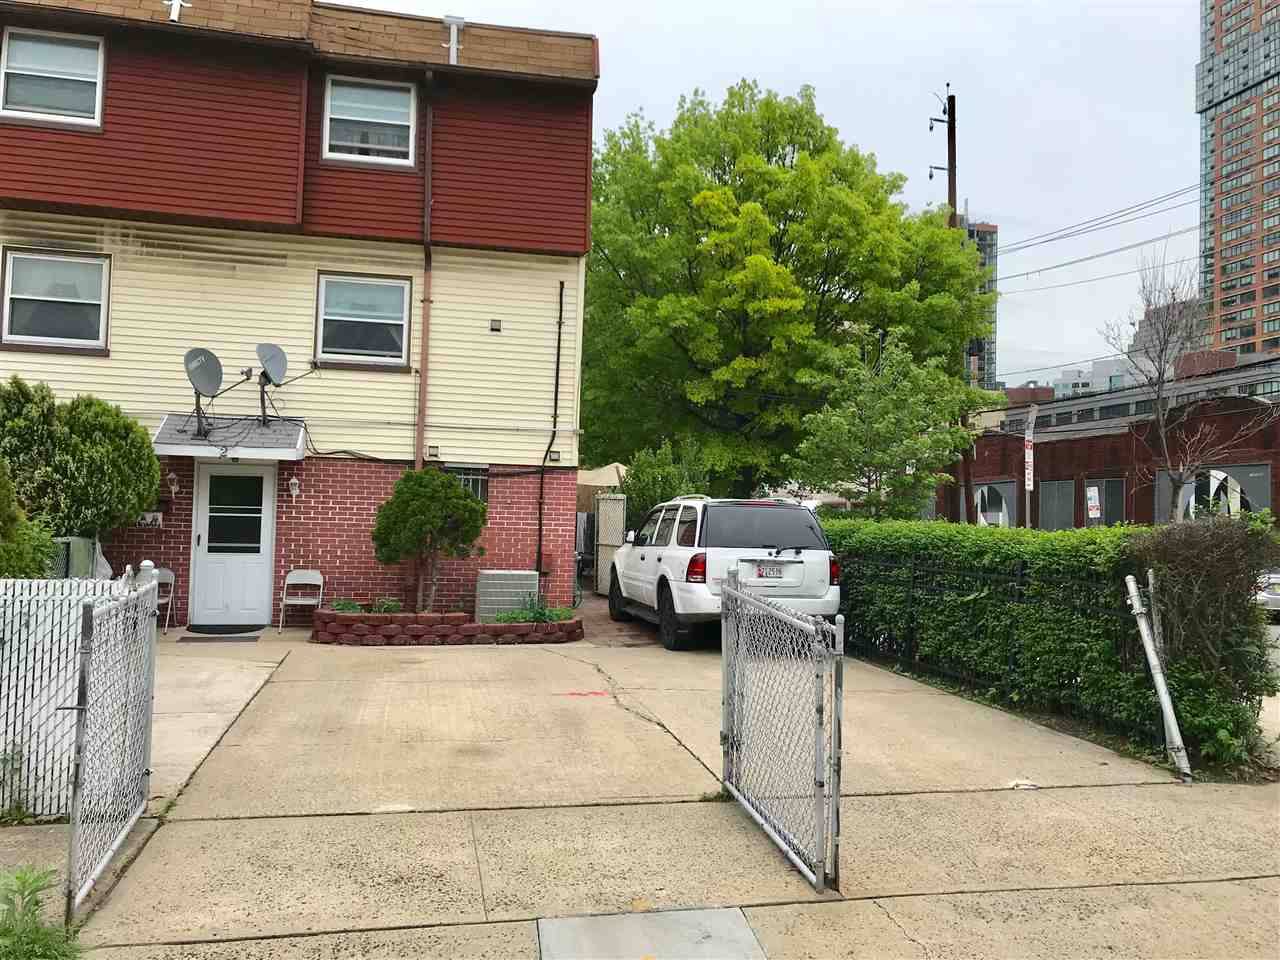 TWO BLOCKS FROM GROVE STREET PATH STATION - 4 BR New Jersey